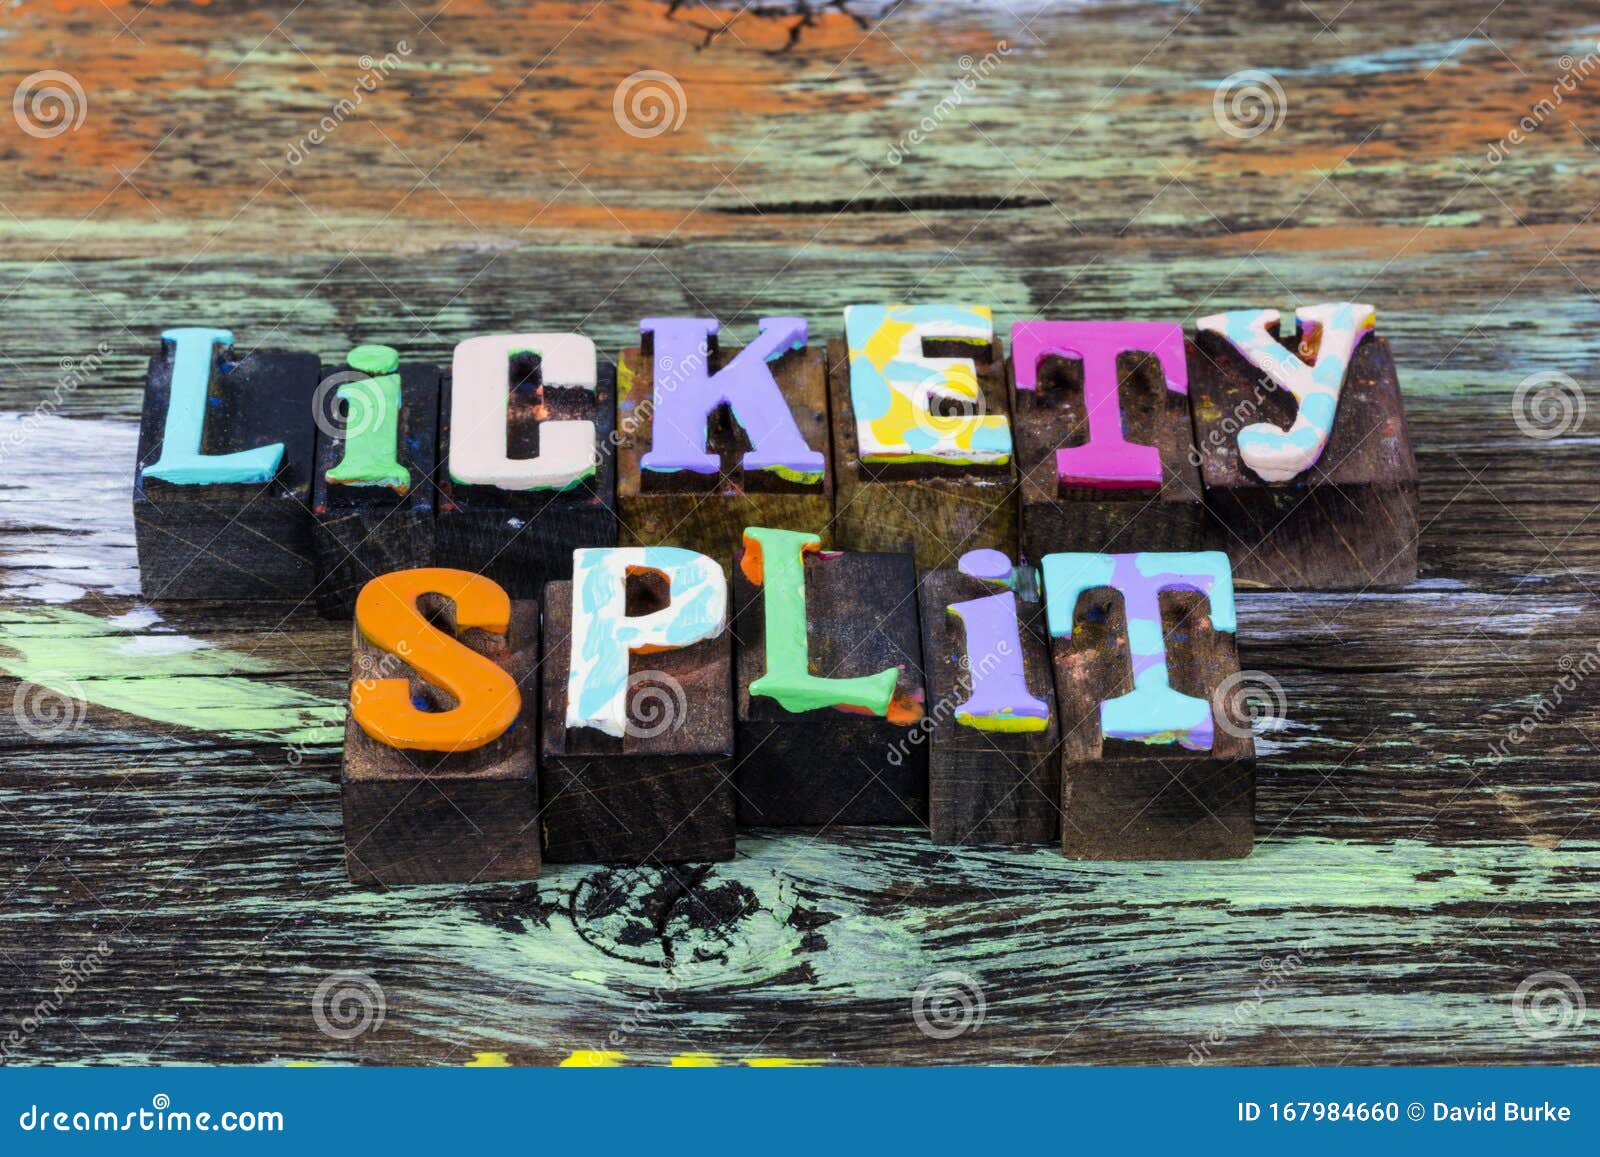 lickety split fast rapid hasty speeding haste expeditious instant action